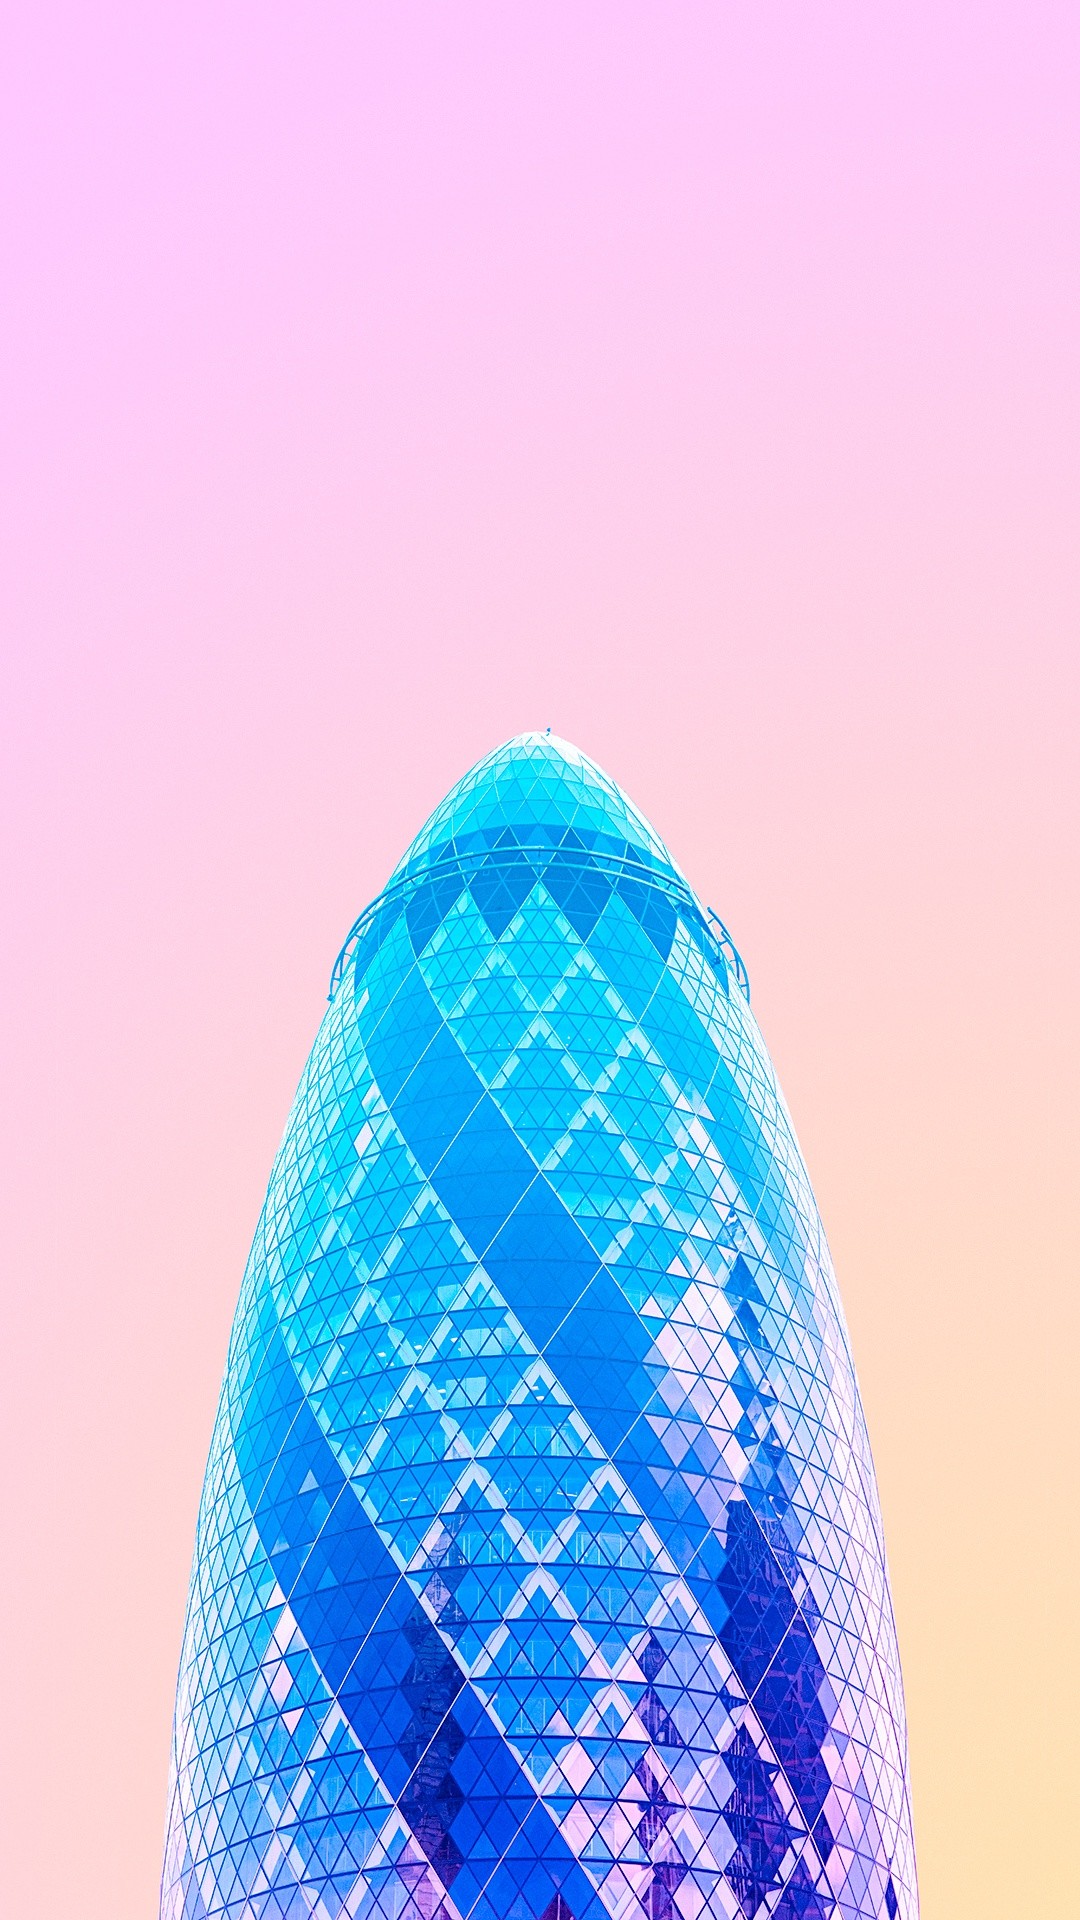 1080x1920 The Gherkin 30 St Mary Axe Colorful iPhone 6 Plus HD Wallpaper